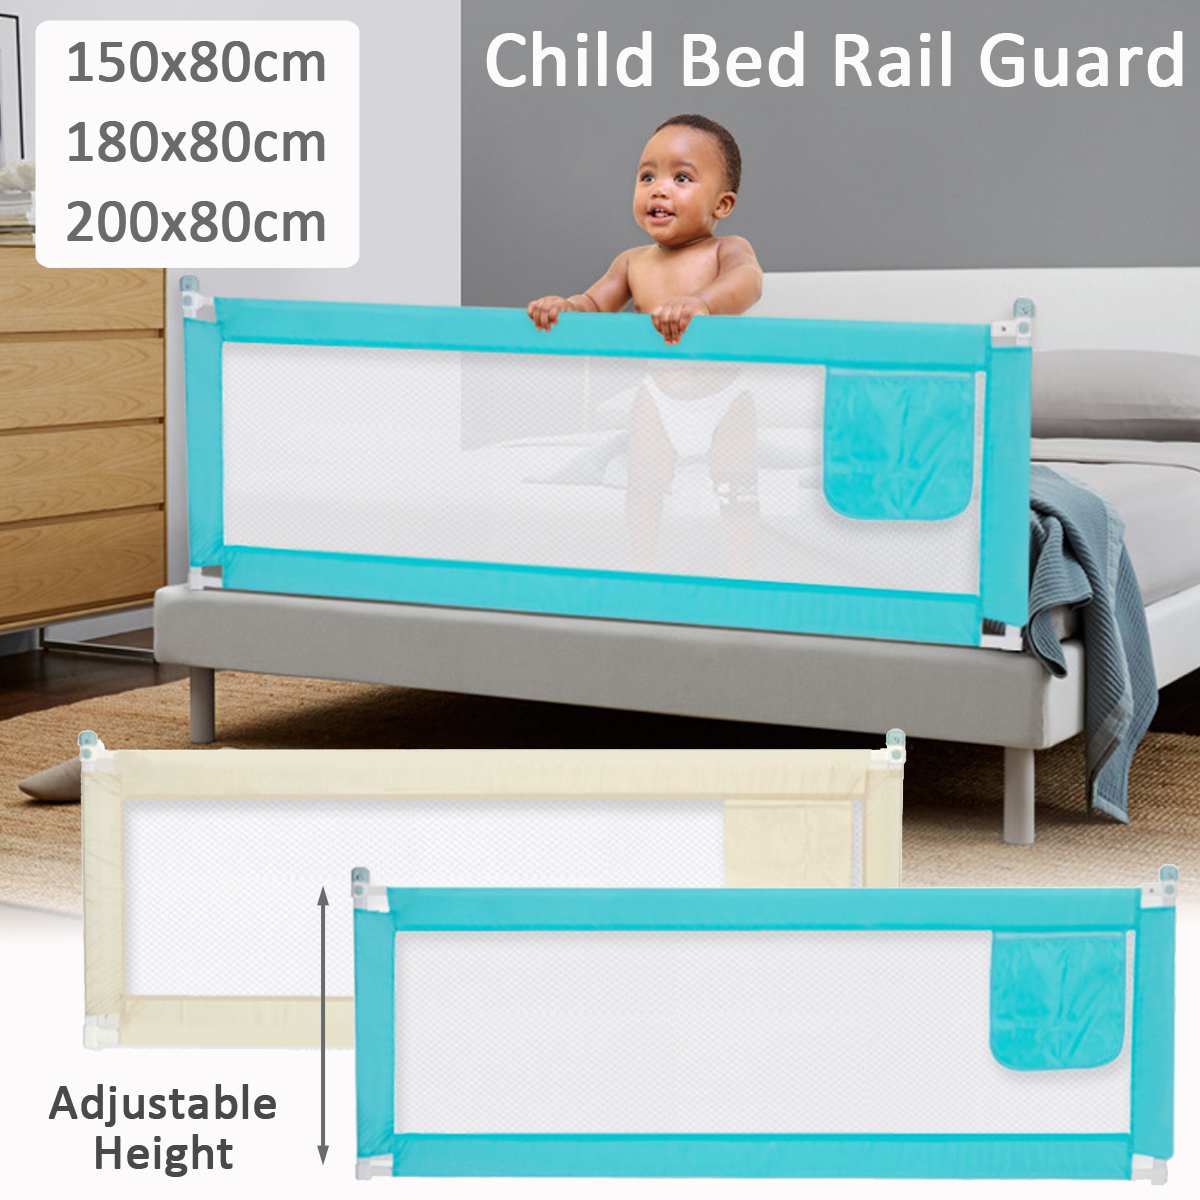 Baby Bed Fence Home Safety Gate Products Child Care Barrier For Beds Crib Rails 